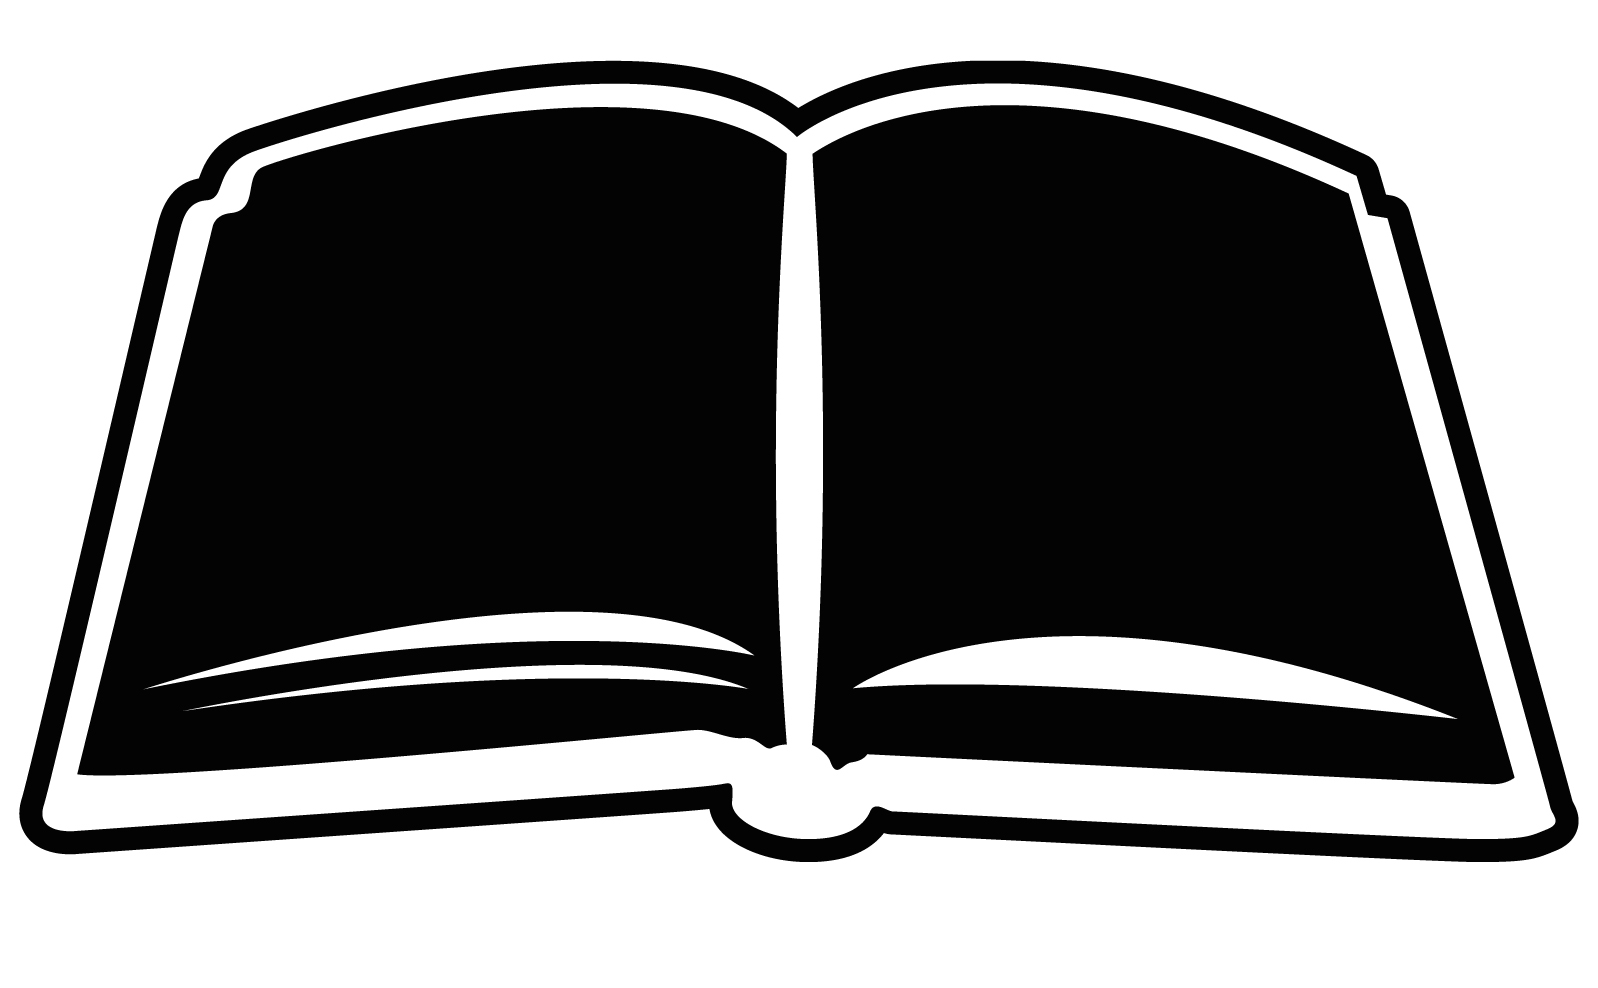 Open Book Black And White Clip Art images & pictures - NearPics